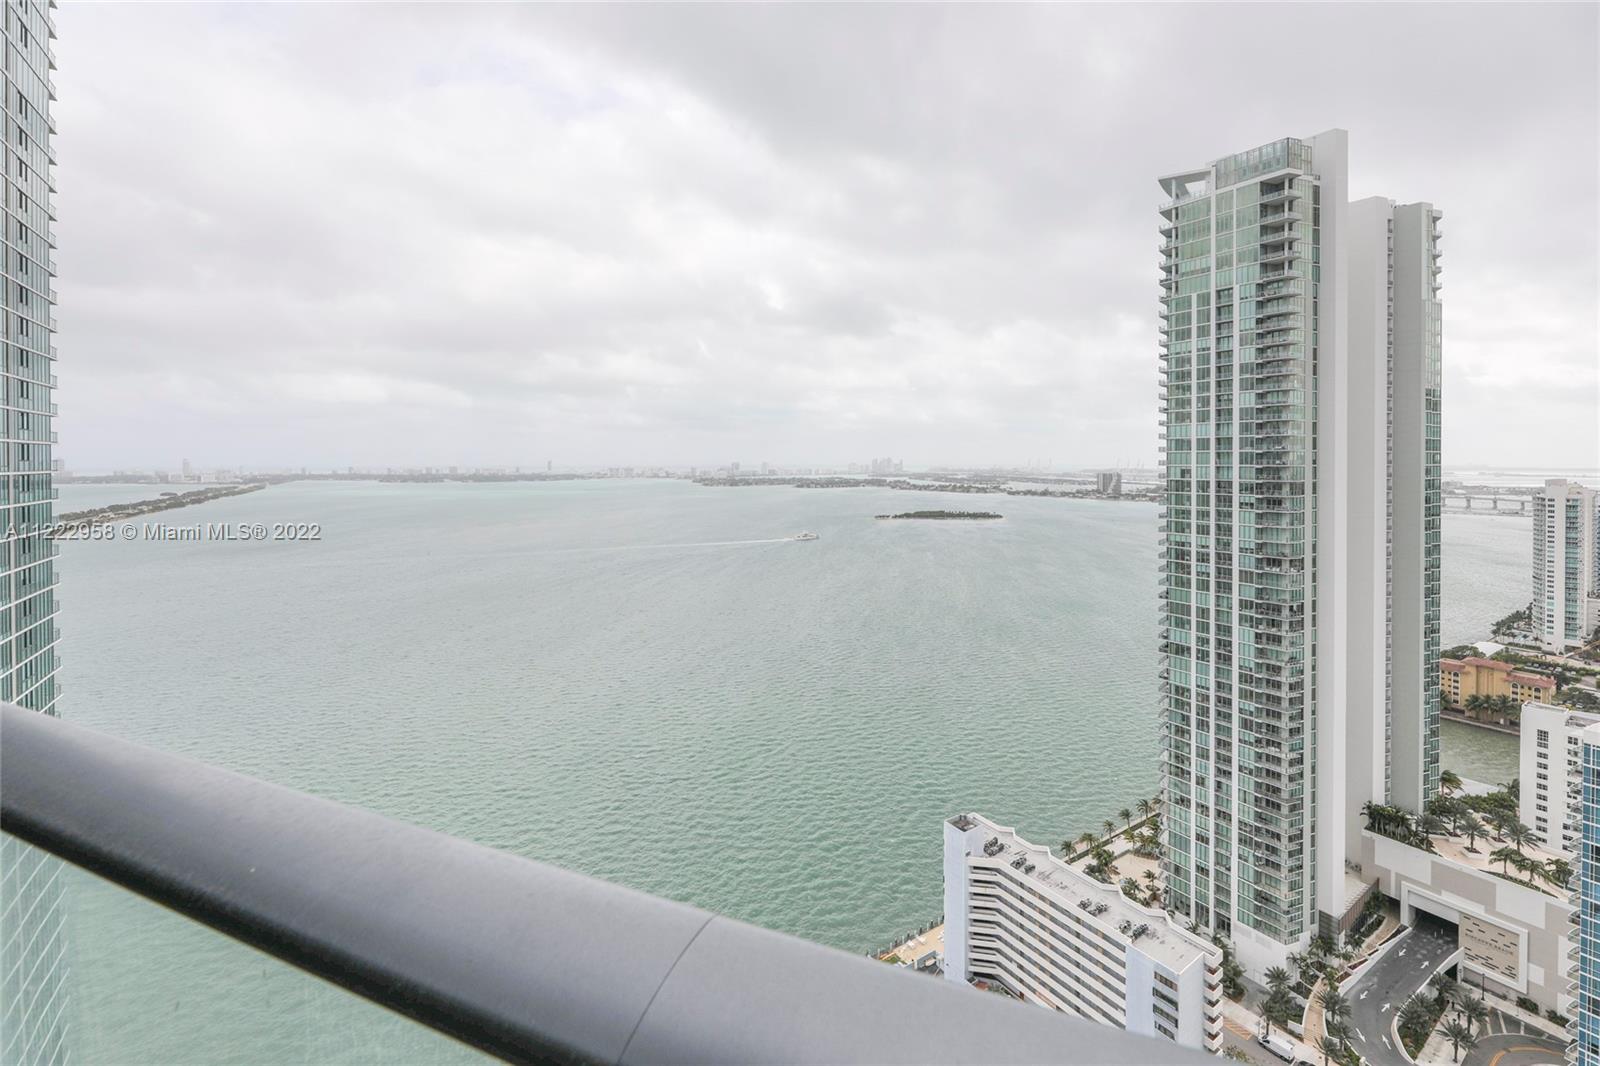 Beautiful 4 en-suite bedrooms & 4.5 bathrooms at the beautiful Paraiso Bay. Residence features floor to ceiling windows throughout so you can enjoy direct & unobstructed water views of the Biscayne Bay, the sunset & city lights! Private elevator & foyer entrance into your open kitchen and living room space. Must See! Currently has a tenant.